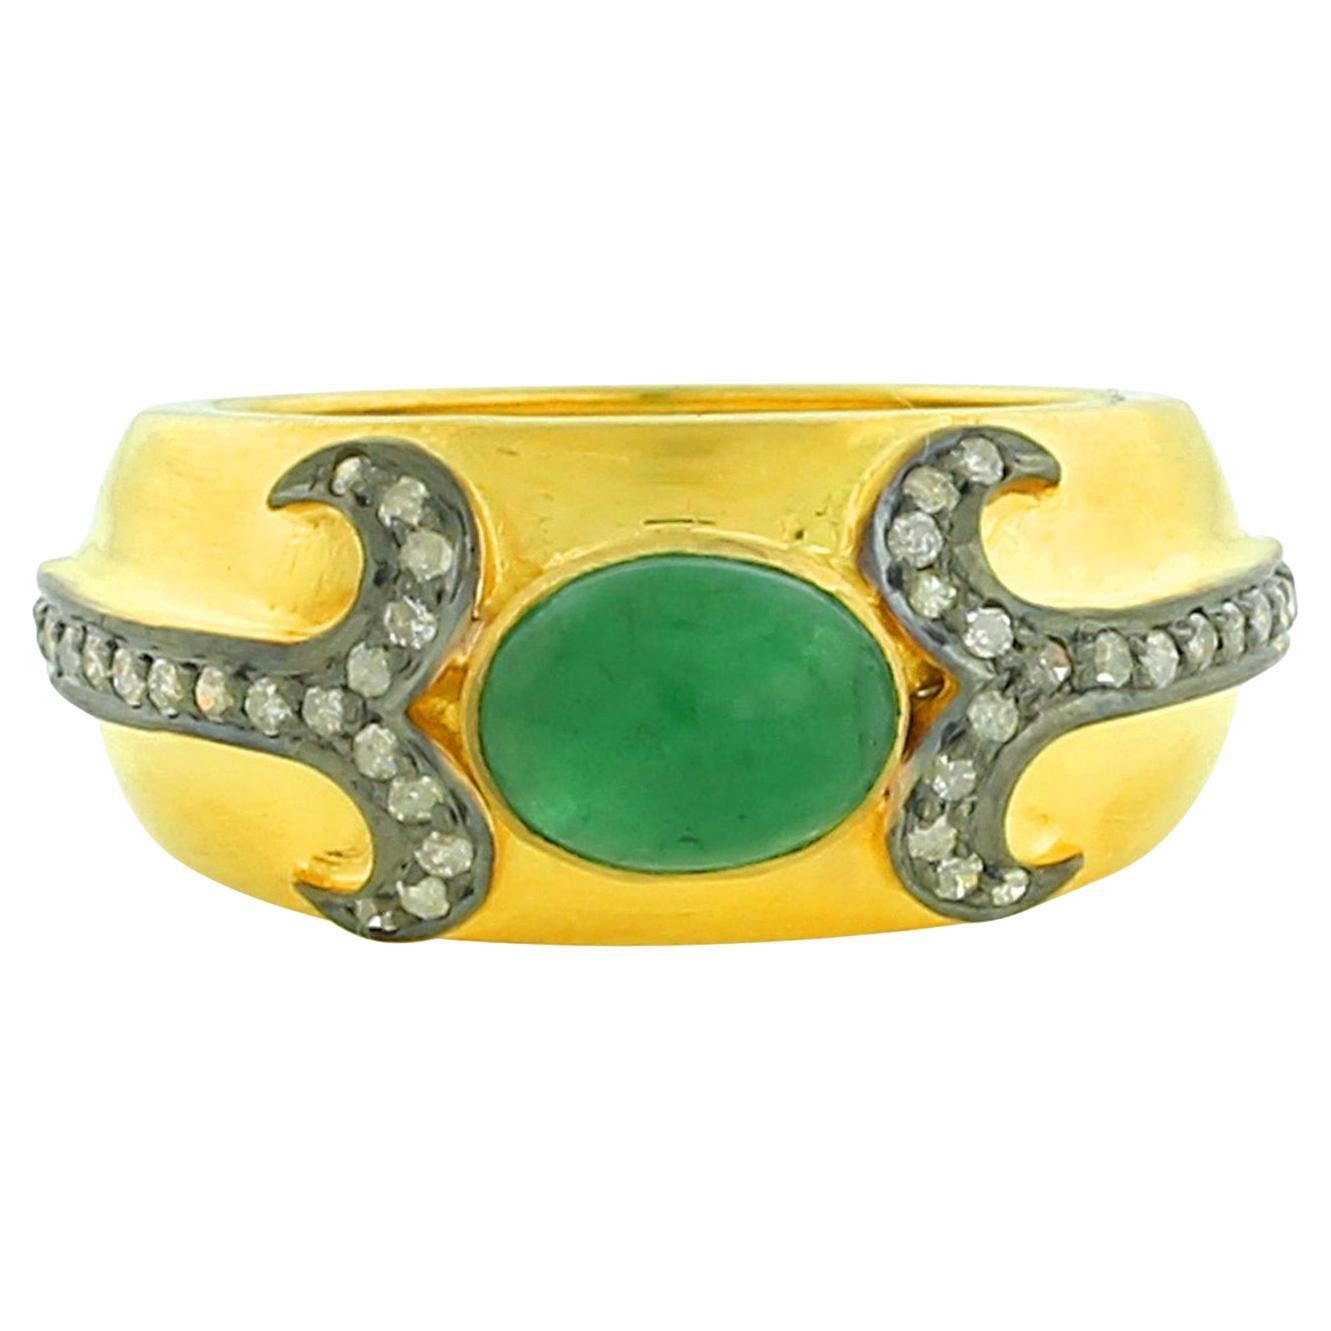 Center Stone Emerald Ring With Diamonds Made In 18k Yellow Gold For Sale